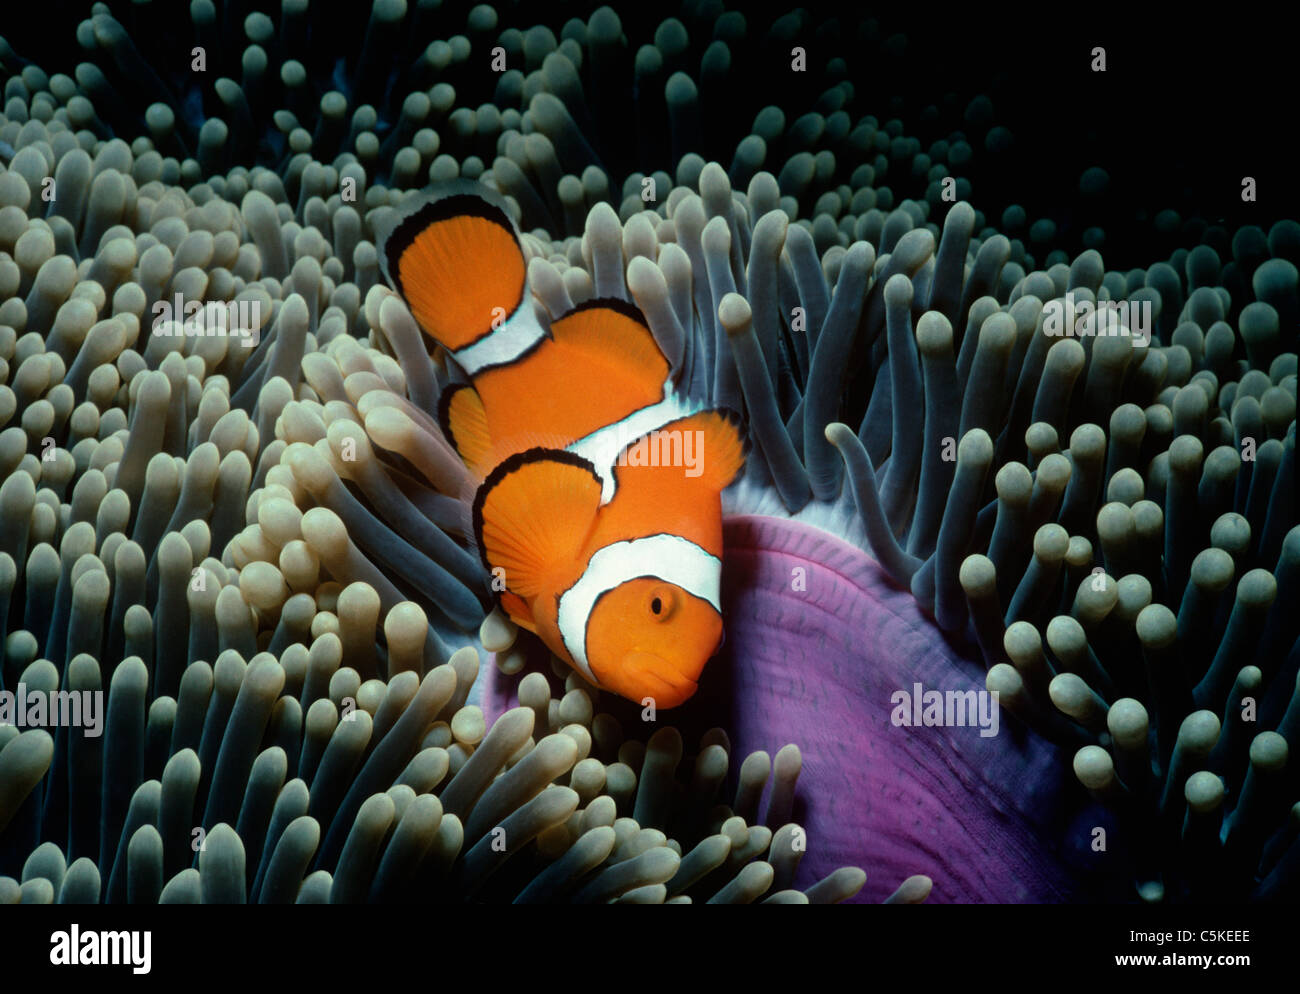 Ocellaris Clownfish (Amphiprion Ocellaris), hides in the protection of a sea anemone's tent. Papua New Guinea, Pacific Ocean Stock Photo